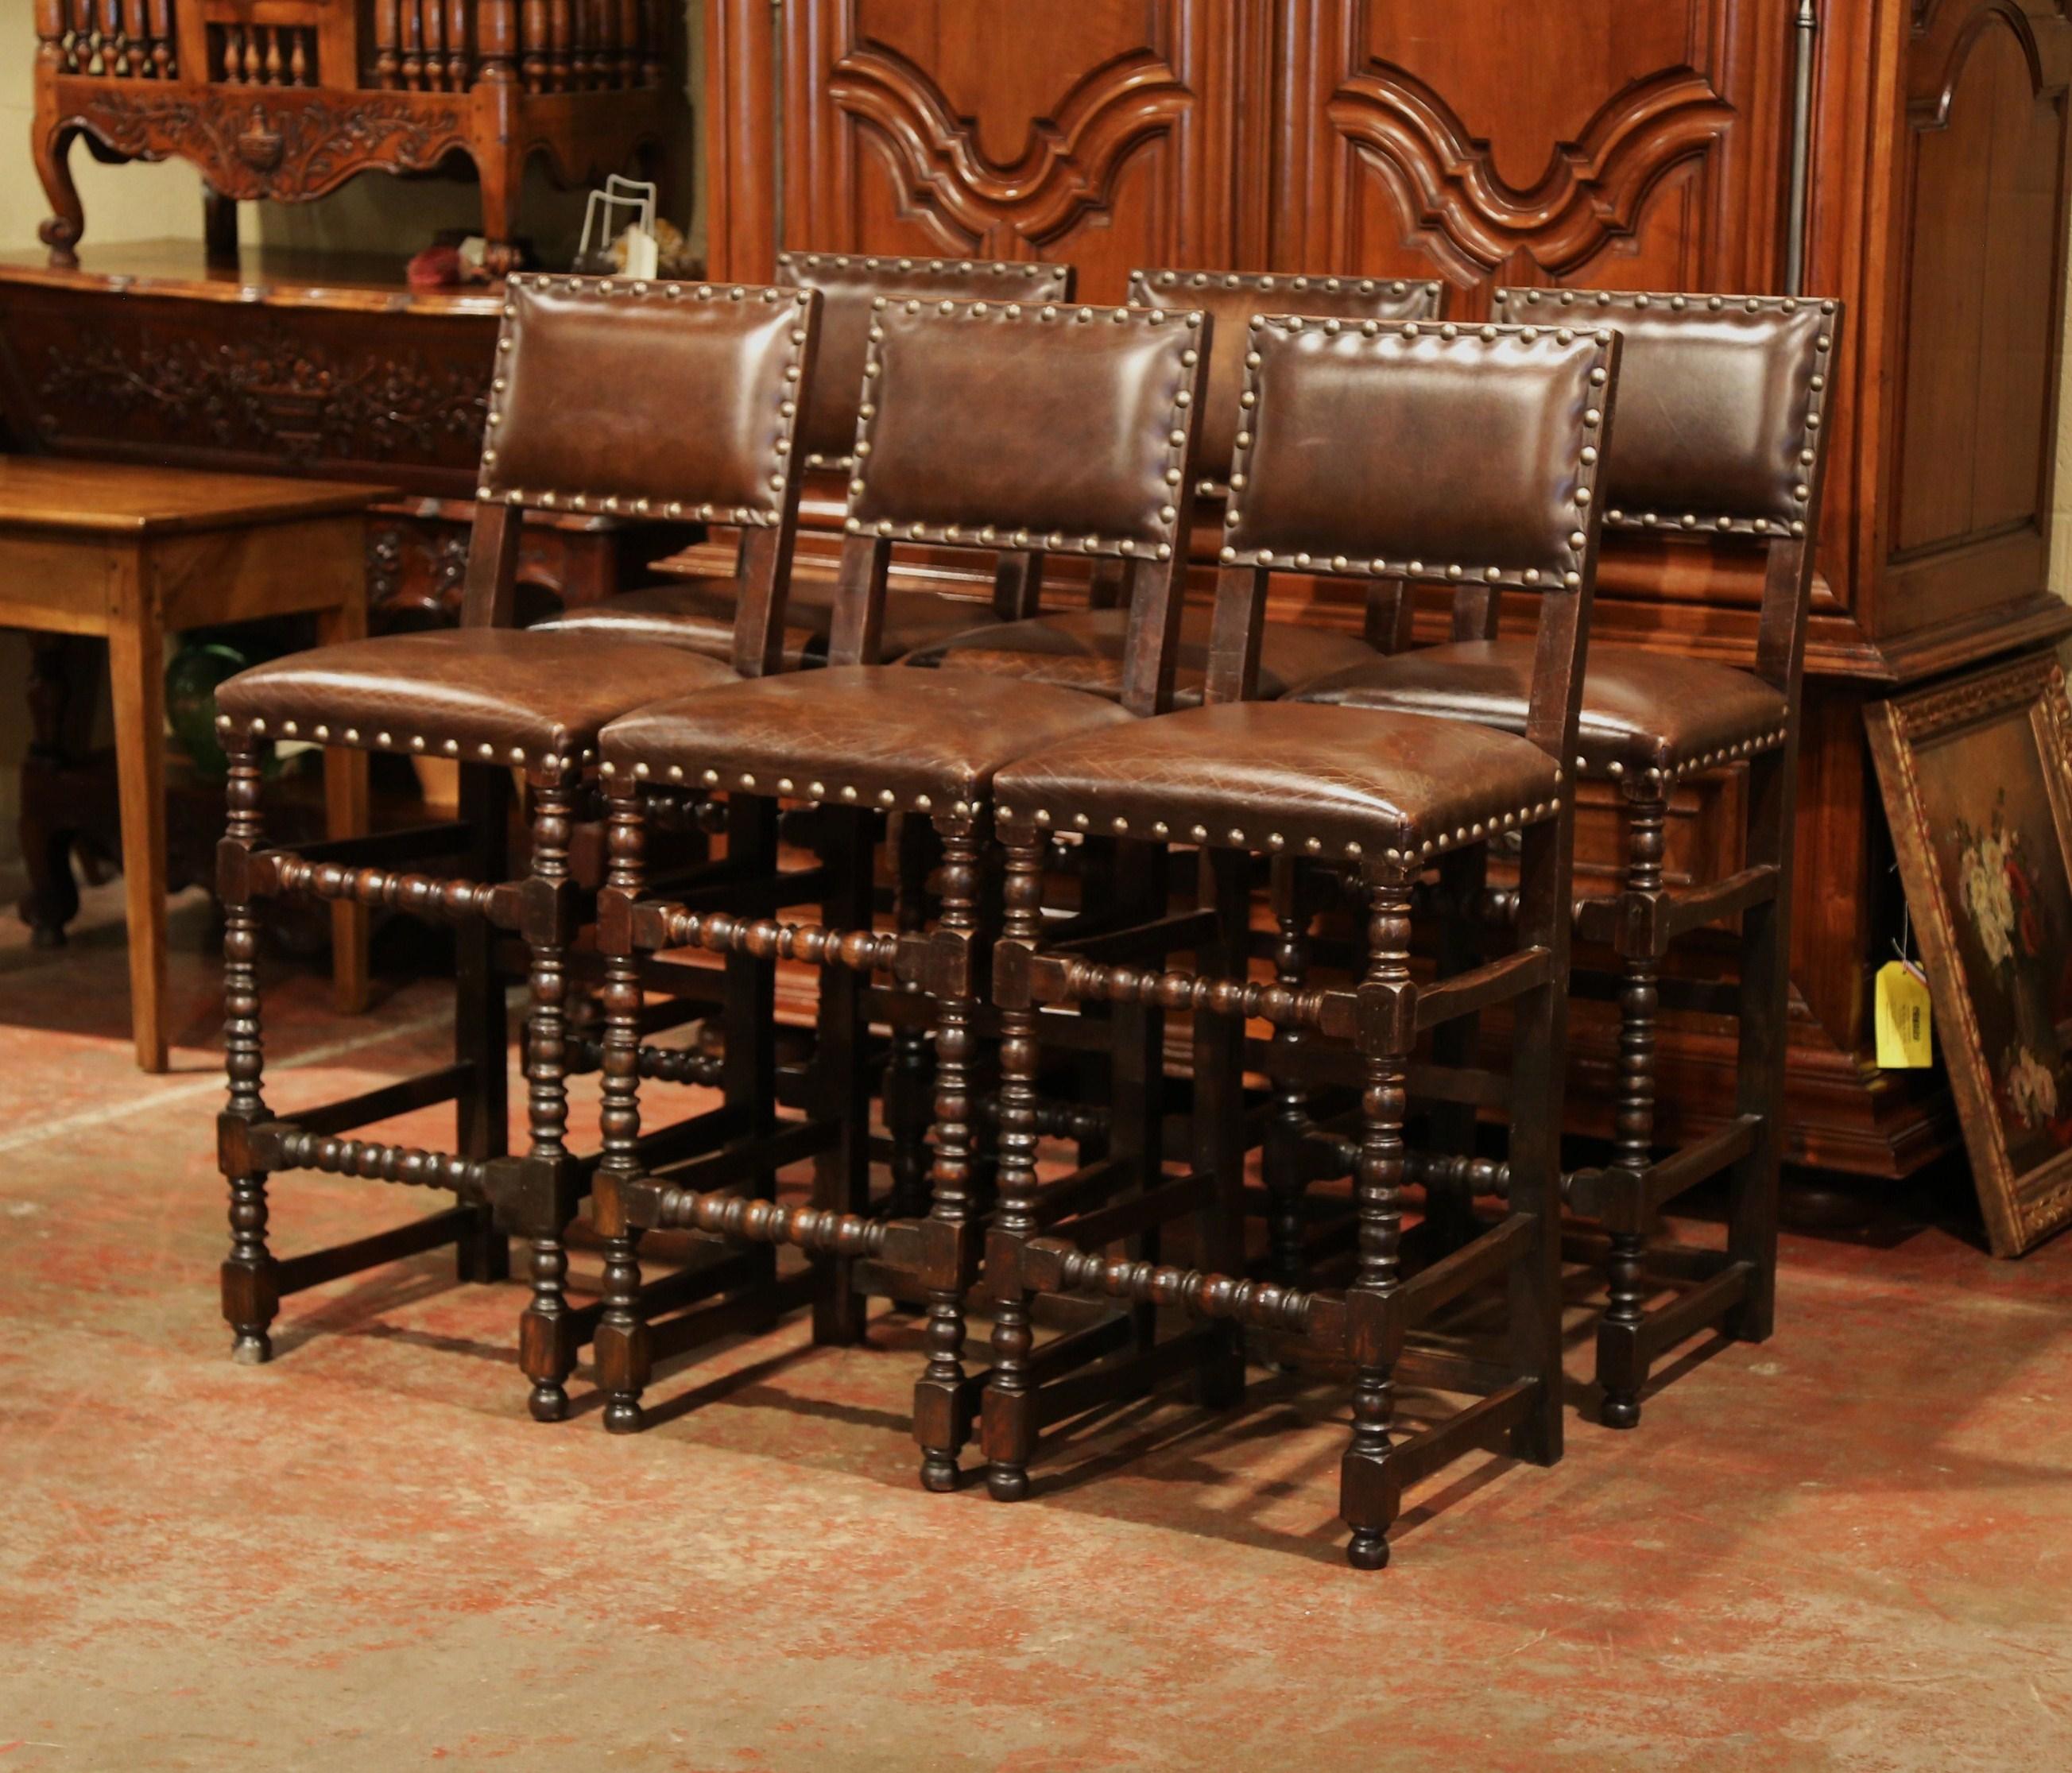 Add a Gothic look to your bar or counter with this elegant set of six antique stools. Crafted in France circa 1890, the high chairs are the perfect height for a 42 to 45